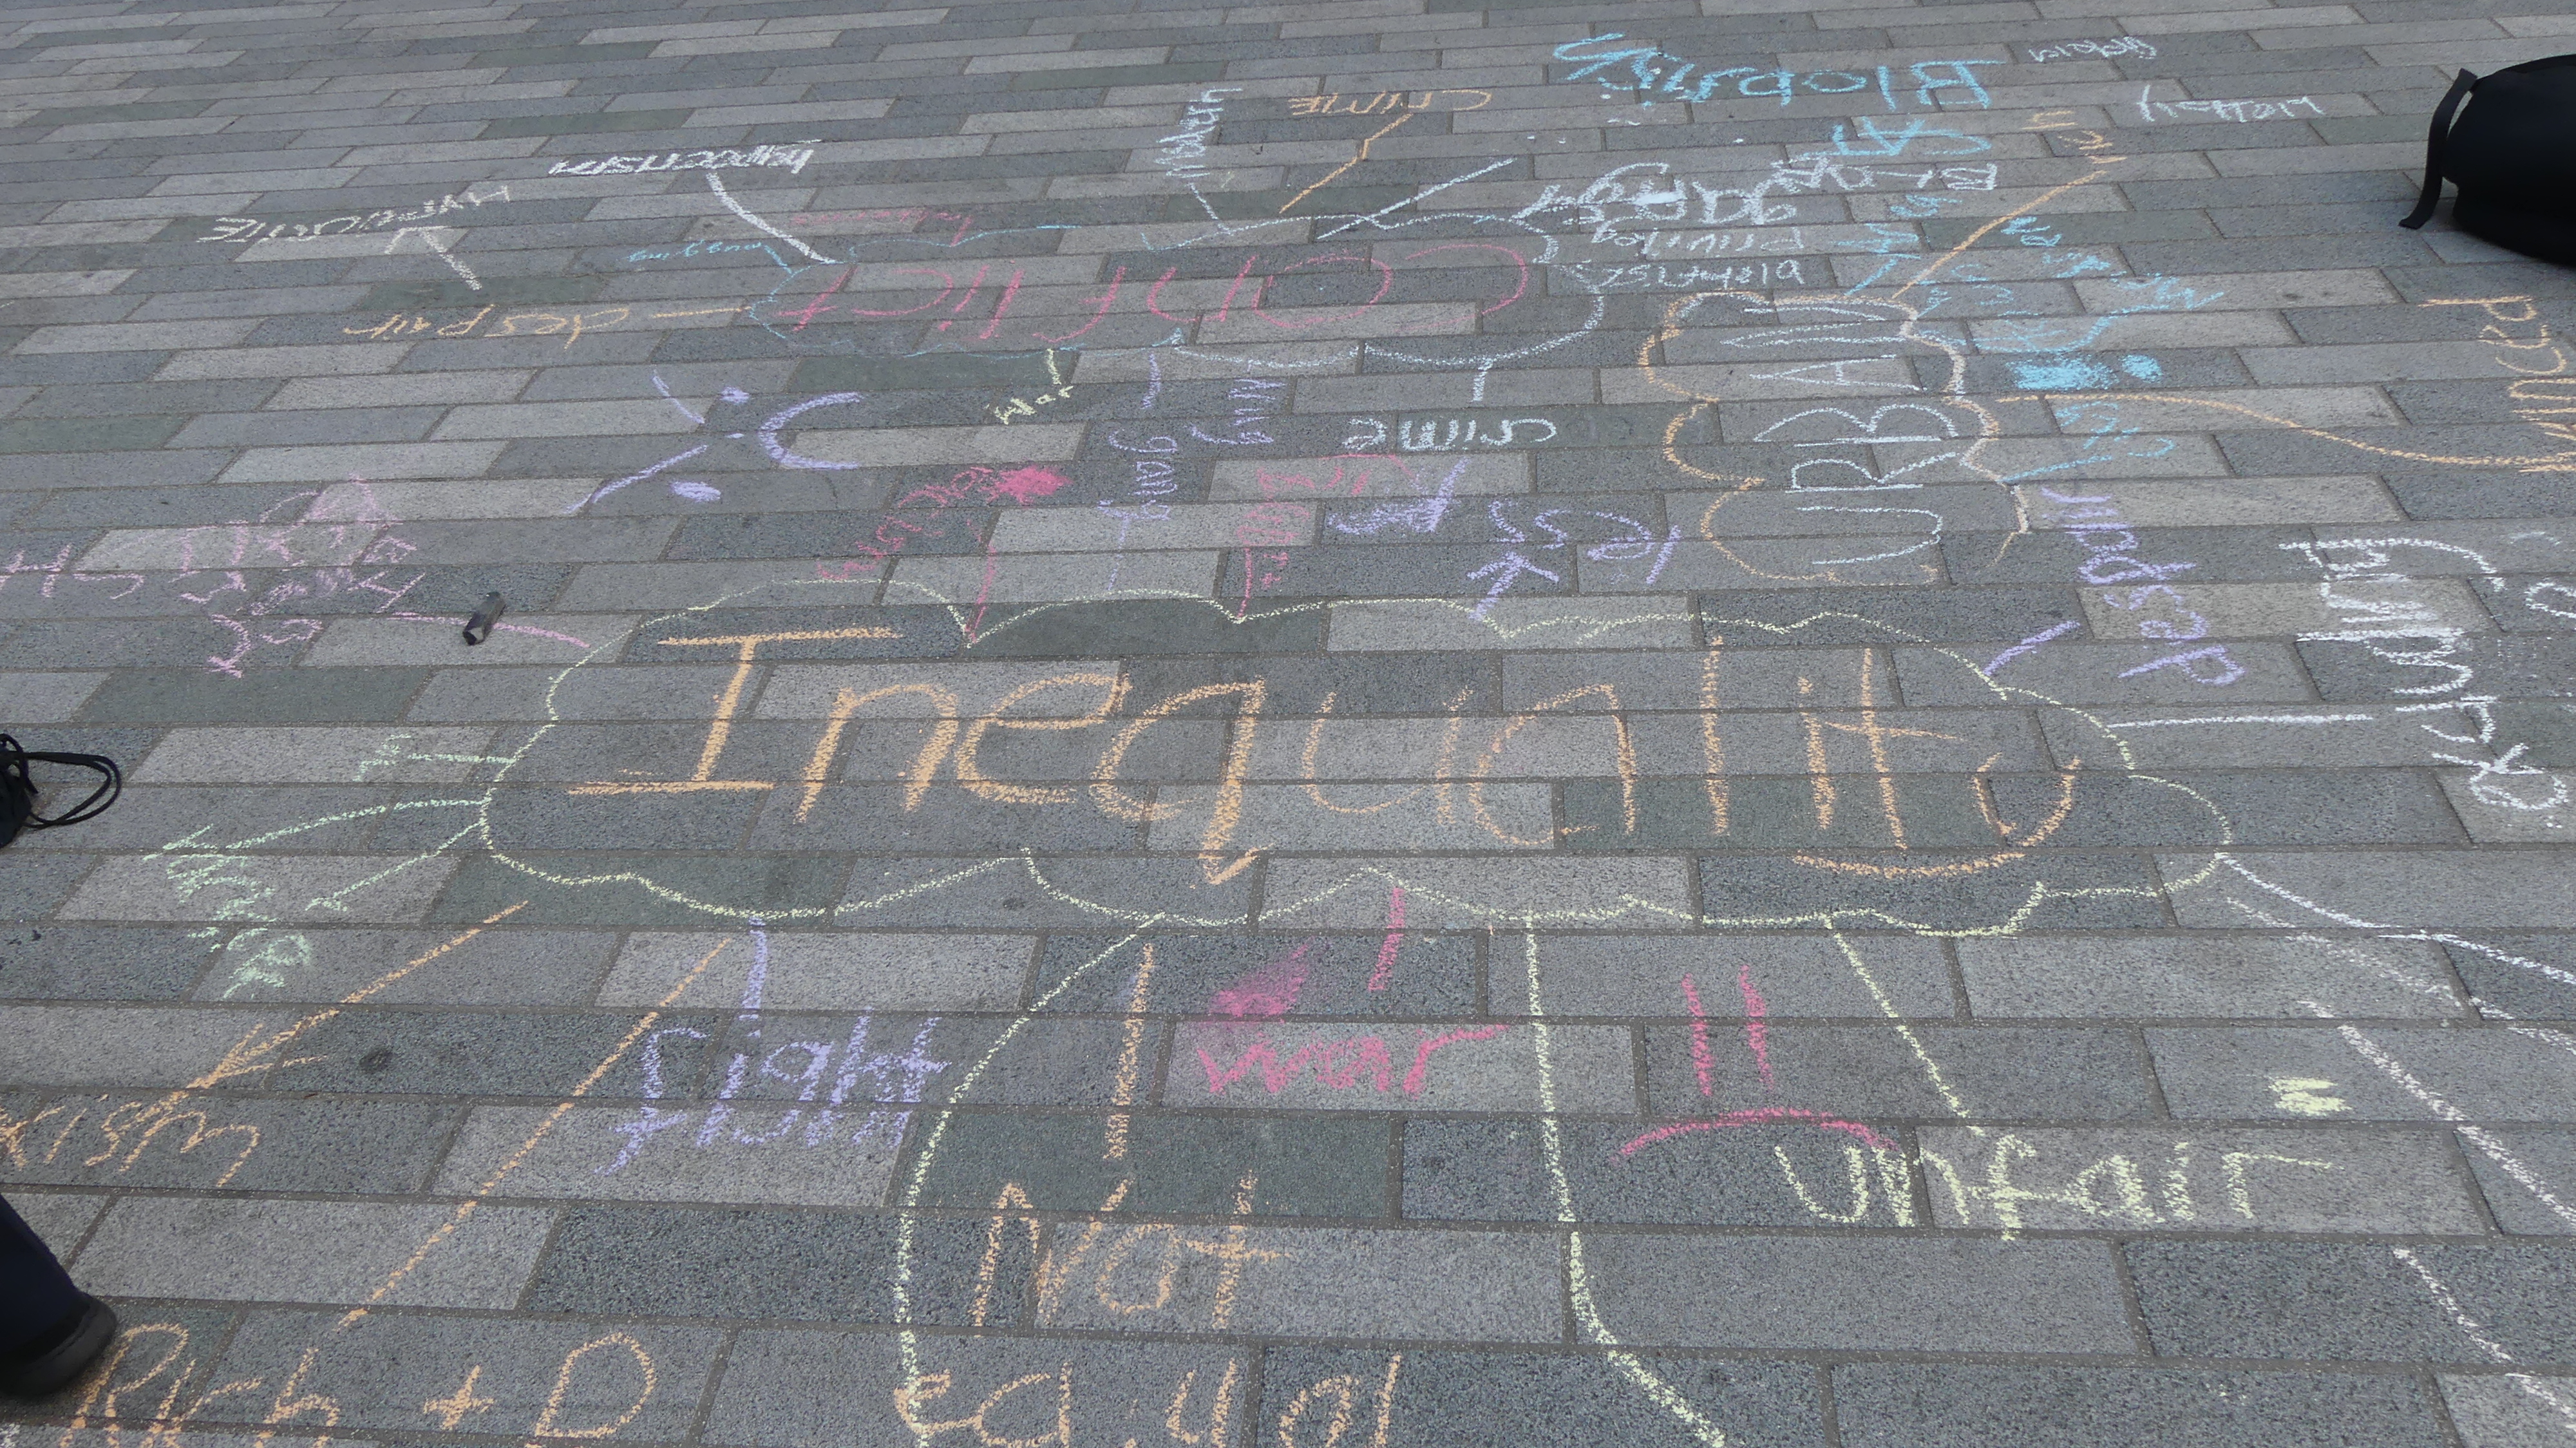 Students' chalk writings on inequality in cities